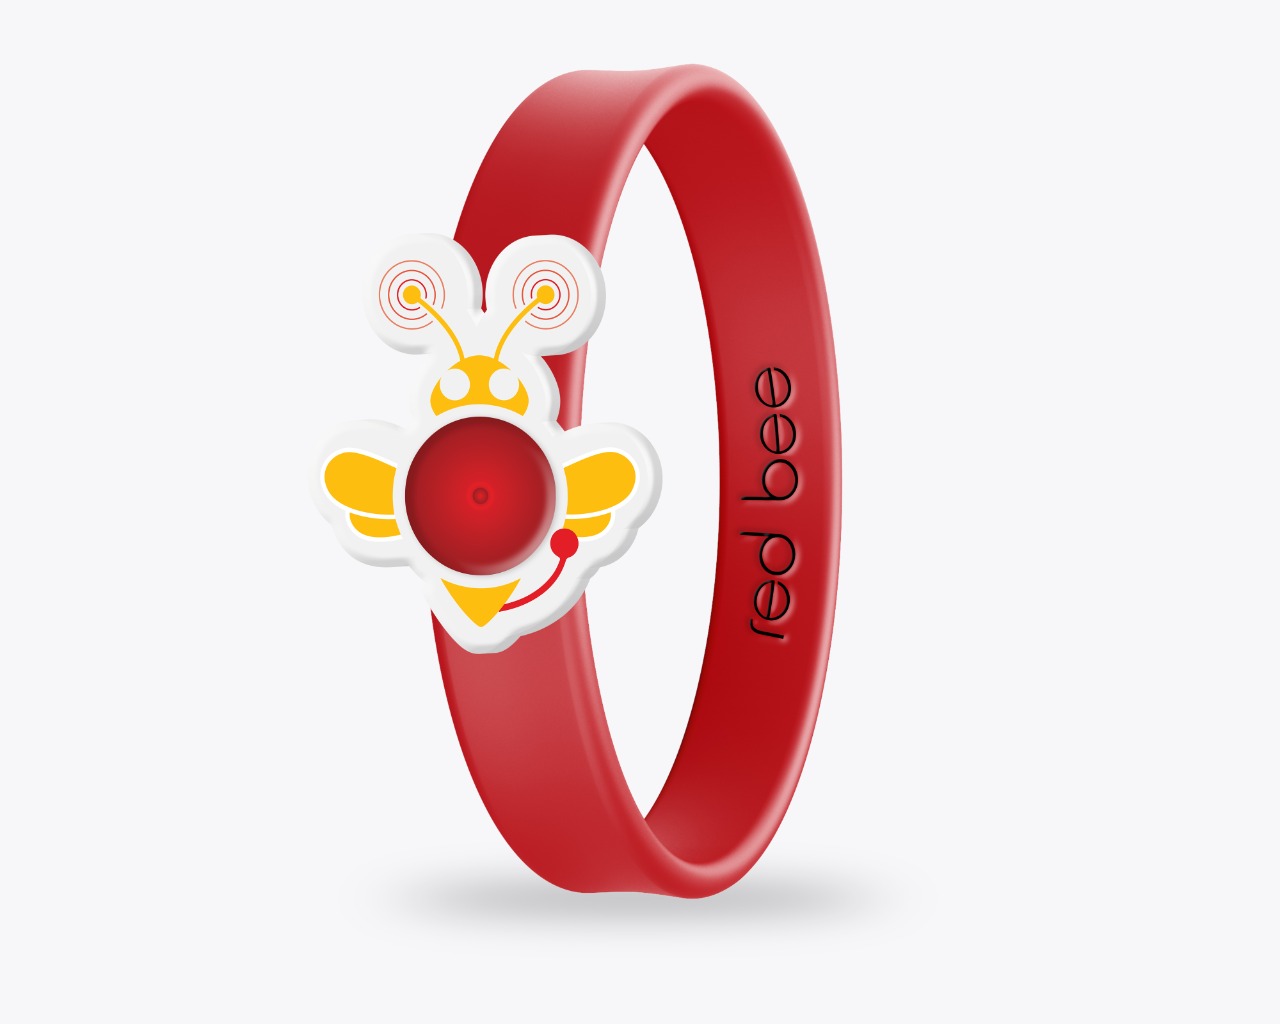 The first prototype version of The Red Bee anti-bullying wristband